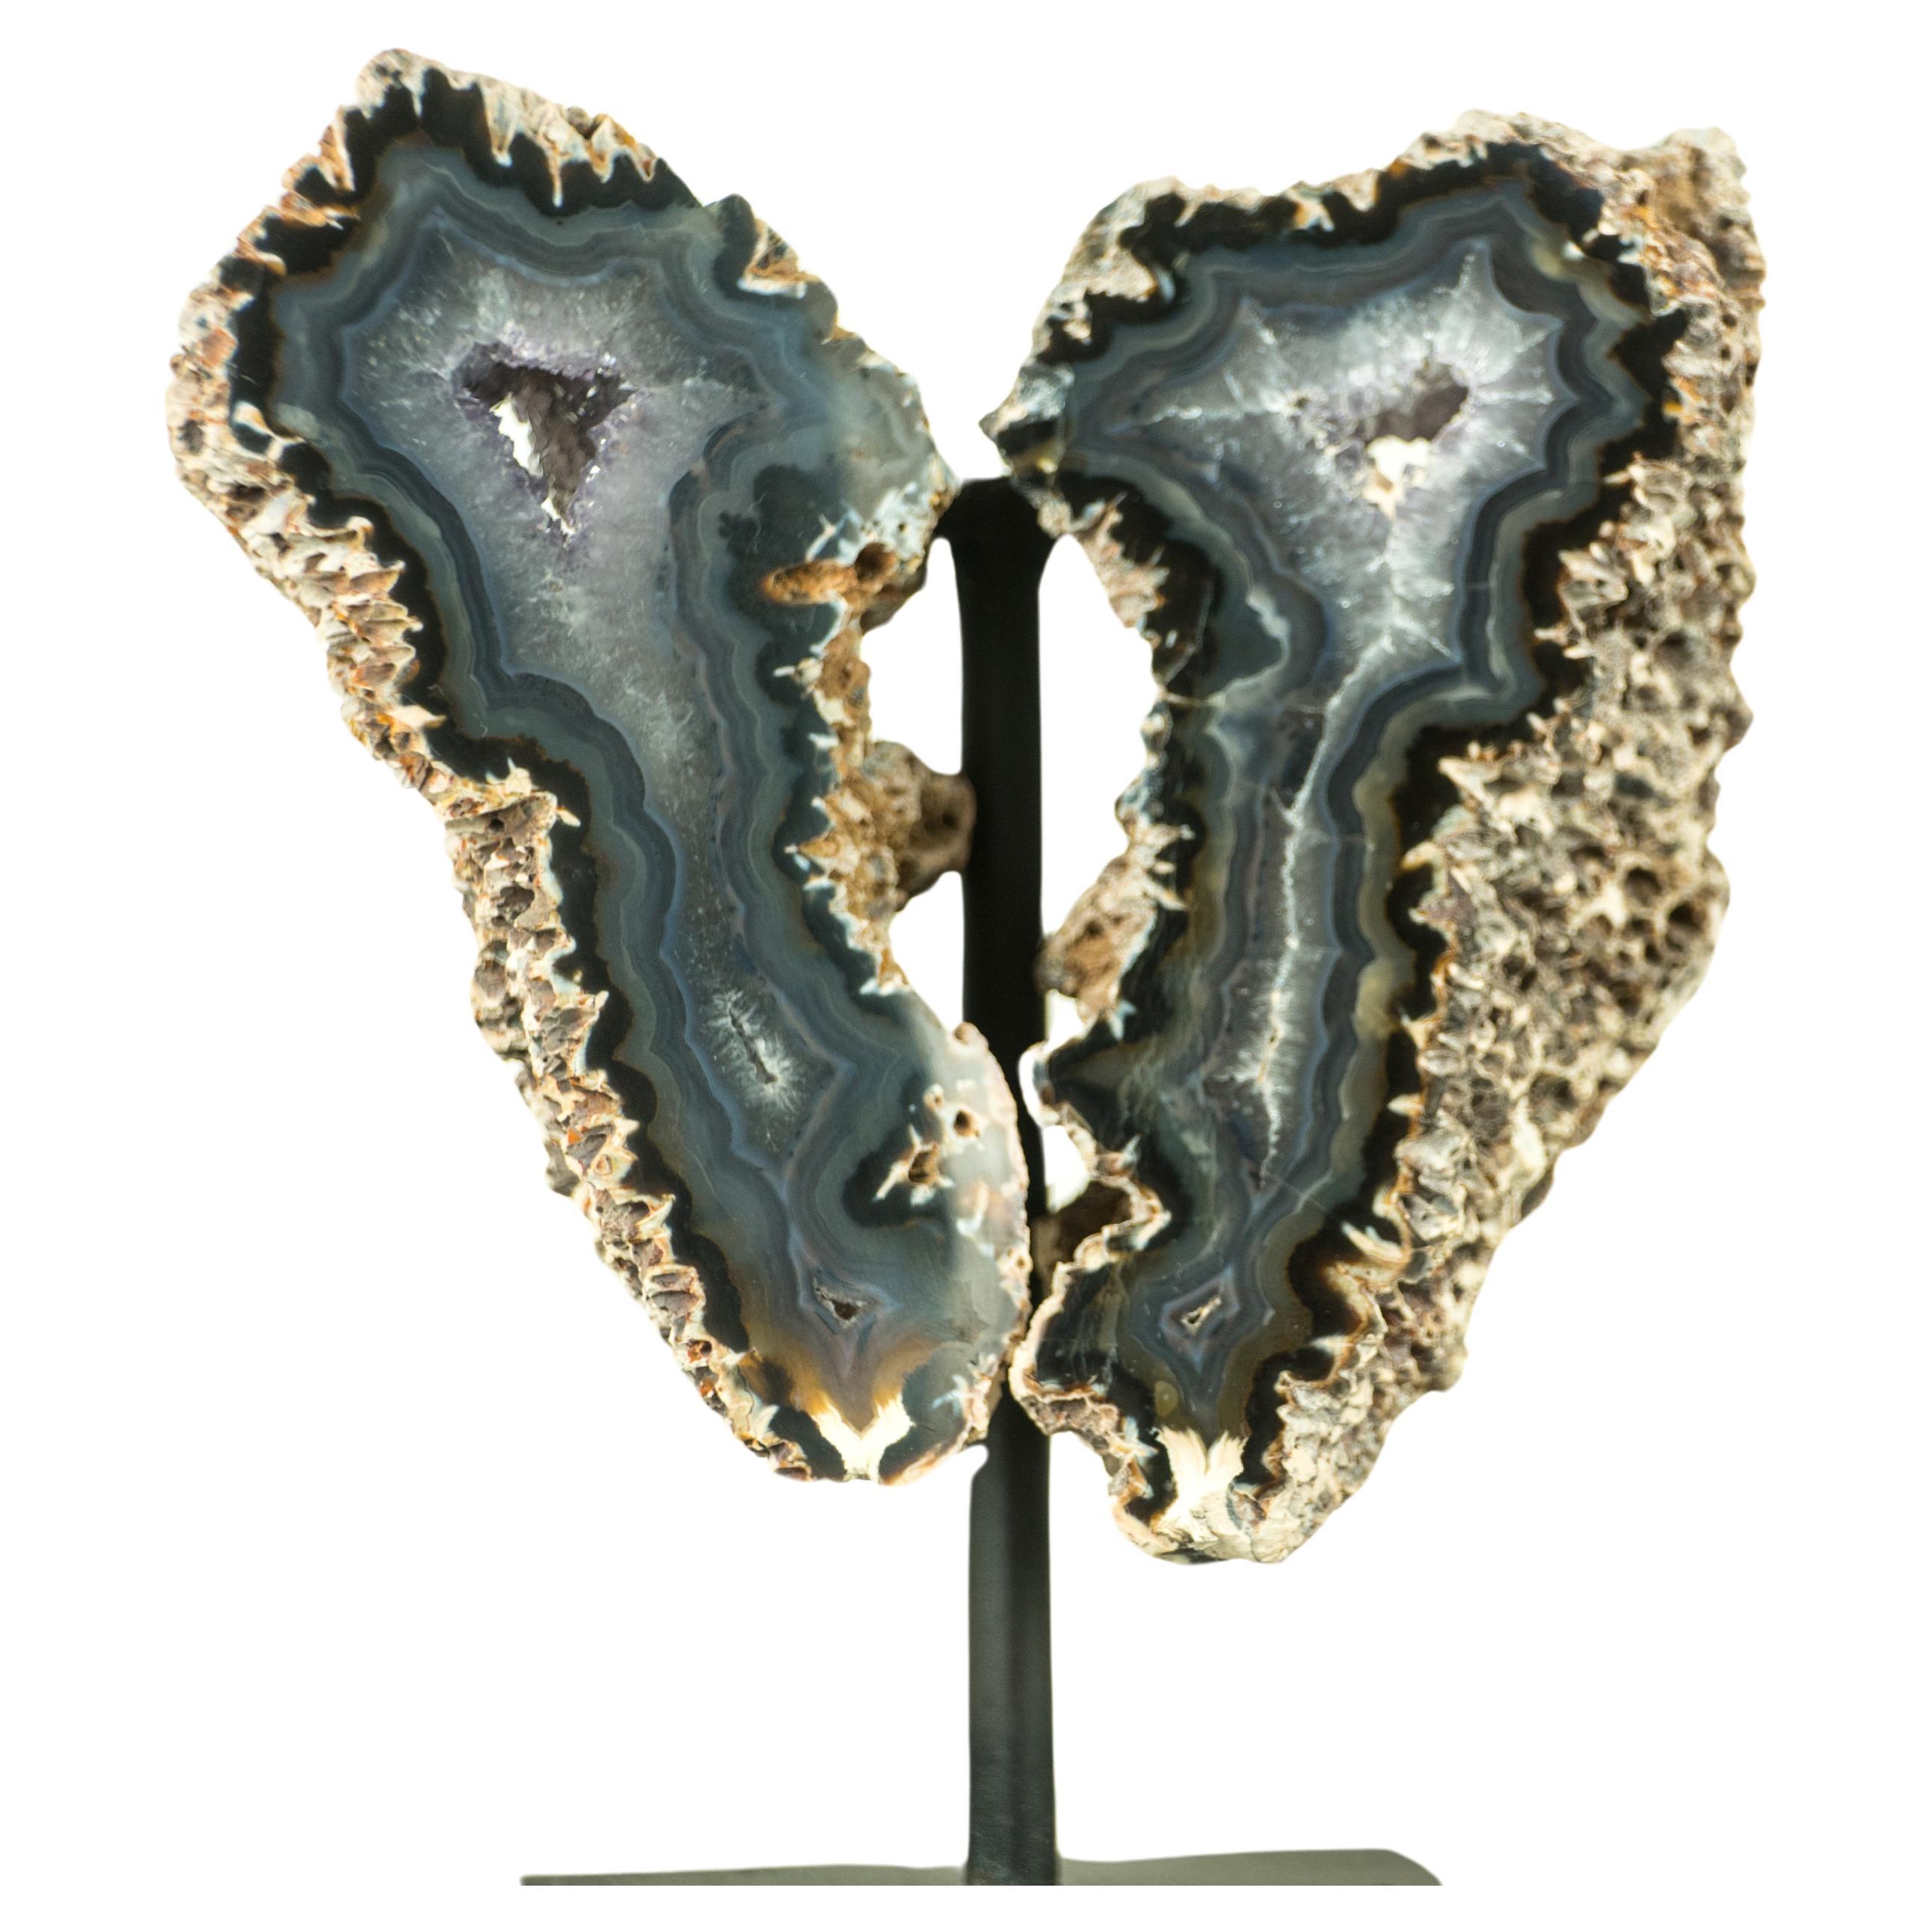 Small Spiky Lace Agate Geode with Druzy, in Butterfly Wings Format, Intact For Sale